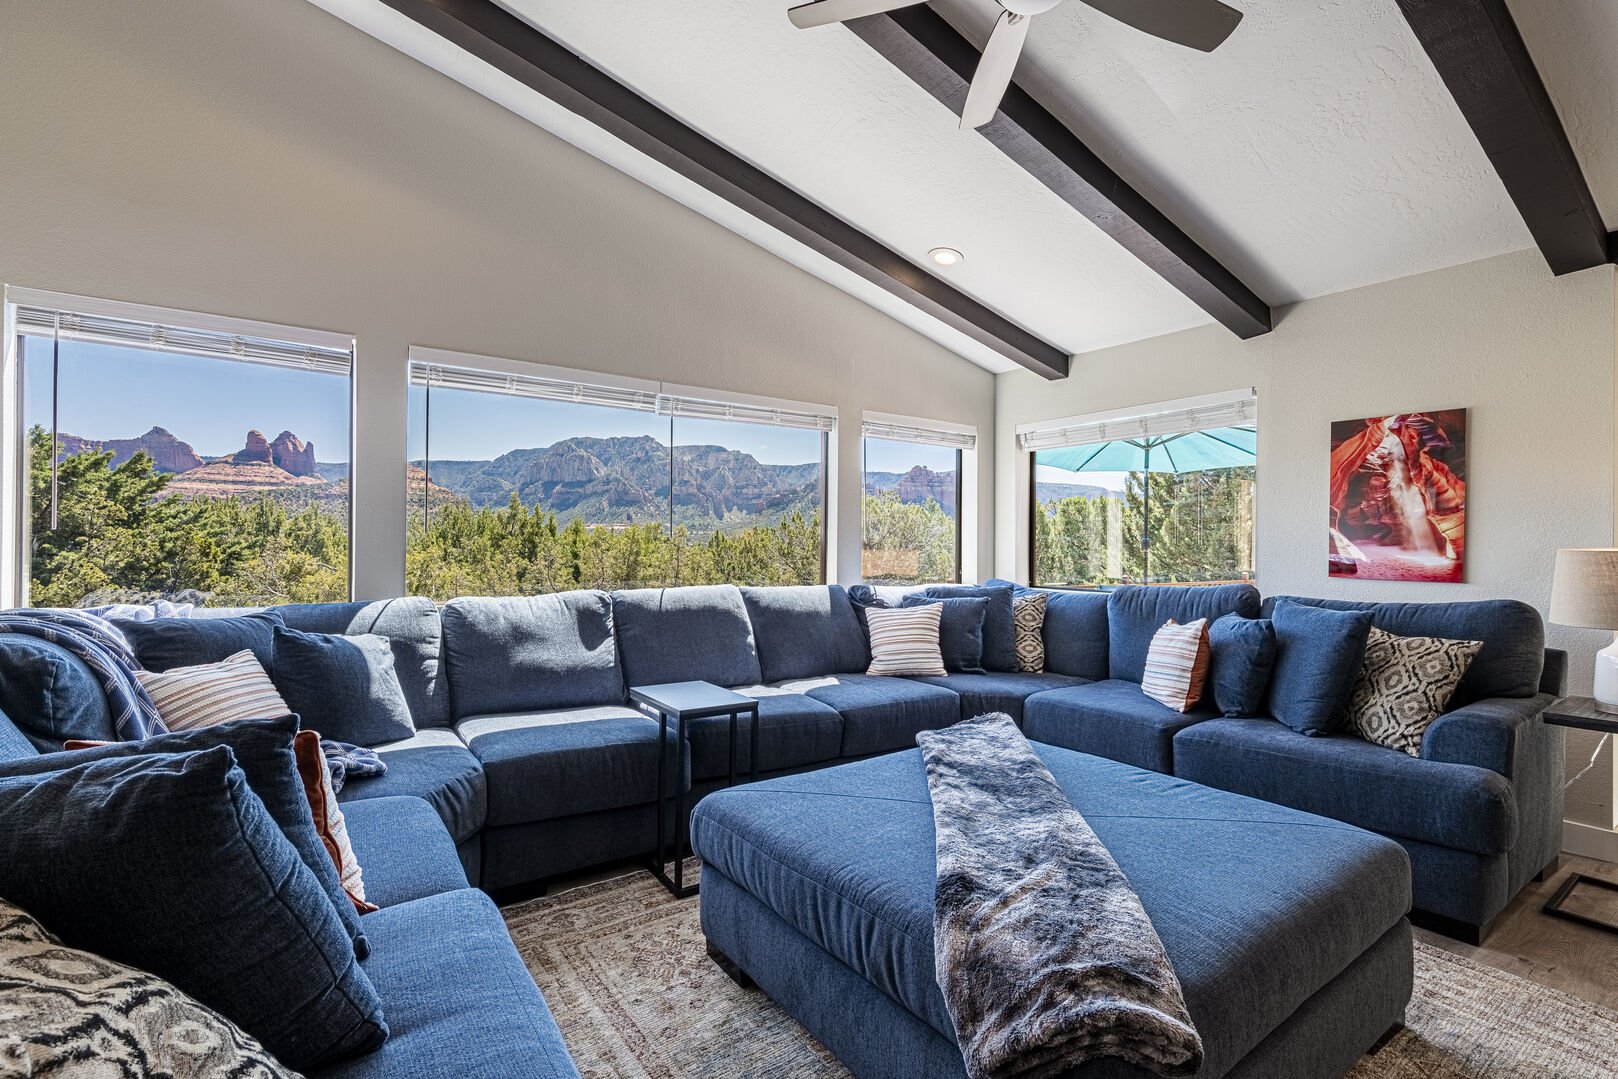 Relax on the Oversized Sectional Sofa While Taking in the Breathtaking Views!